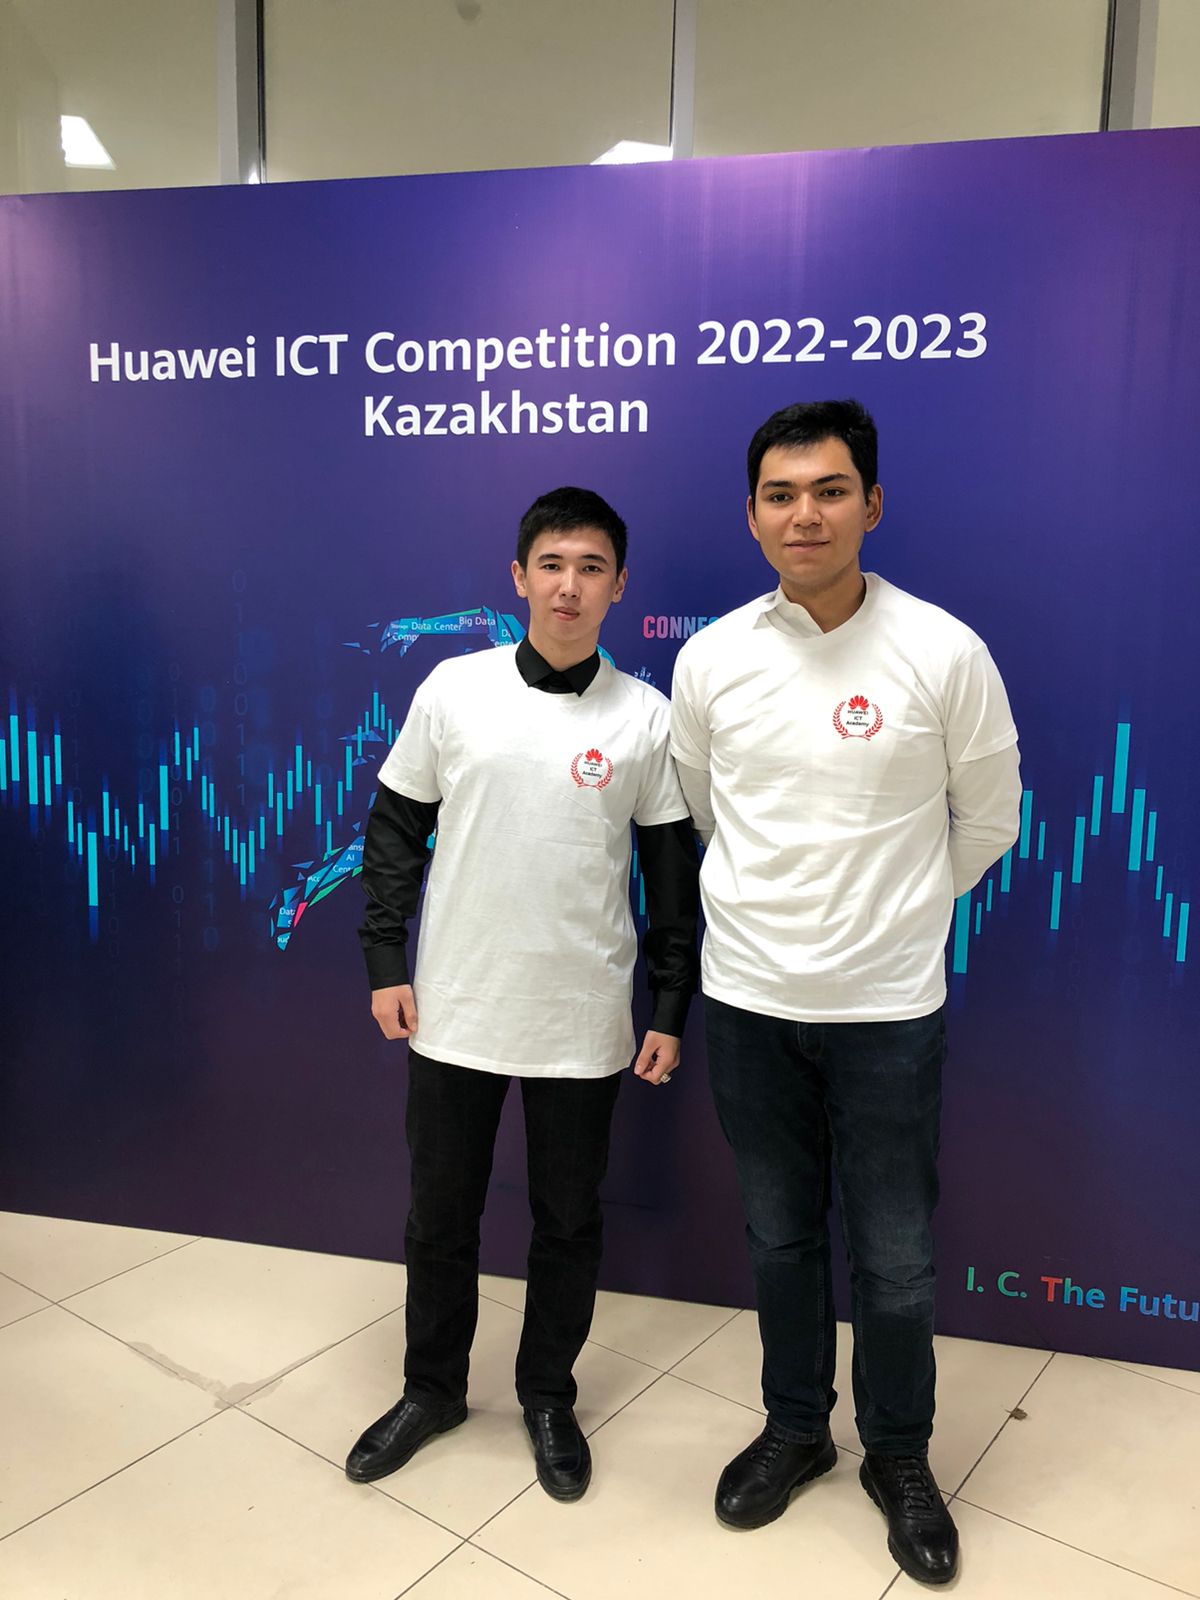 Today, November 21, 2022, at the AL-FARABI UNIVERSITY Library is holding the National Final of Huawei ICT Competition 2022-2023. 